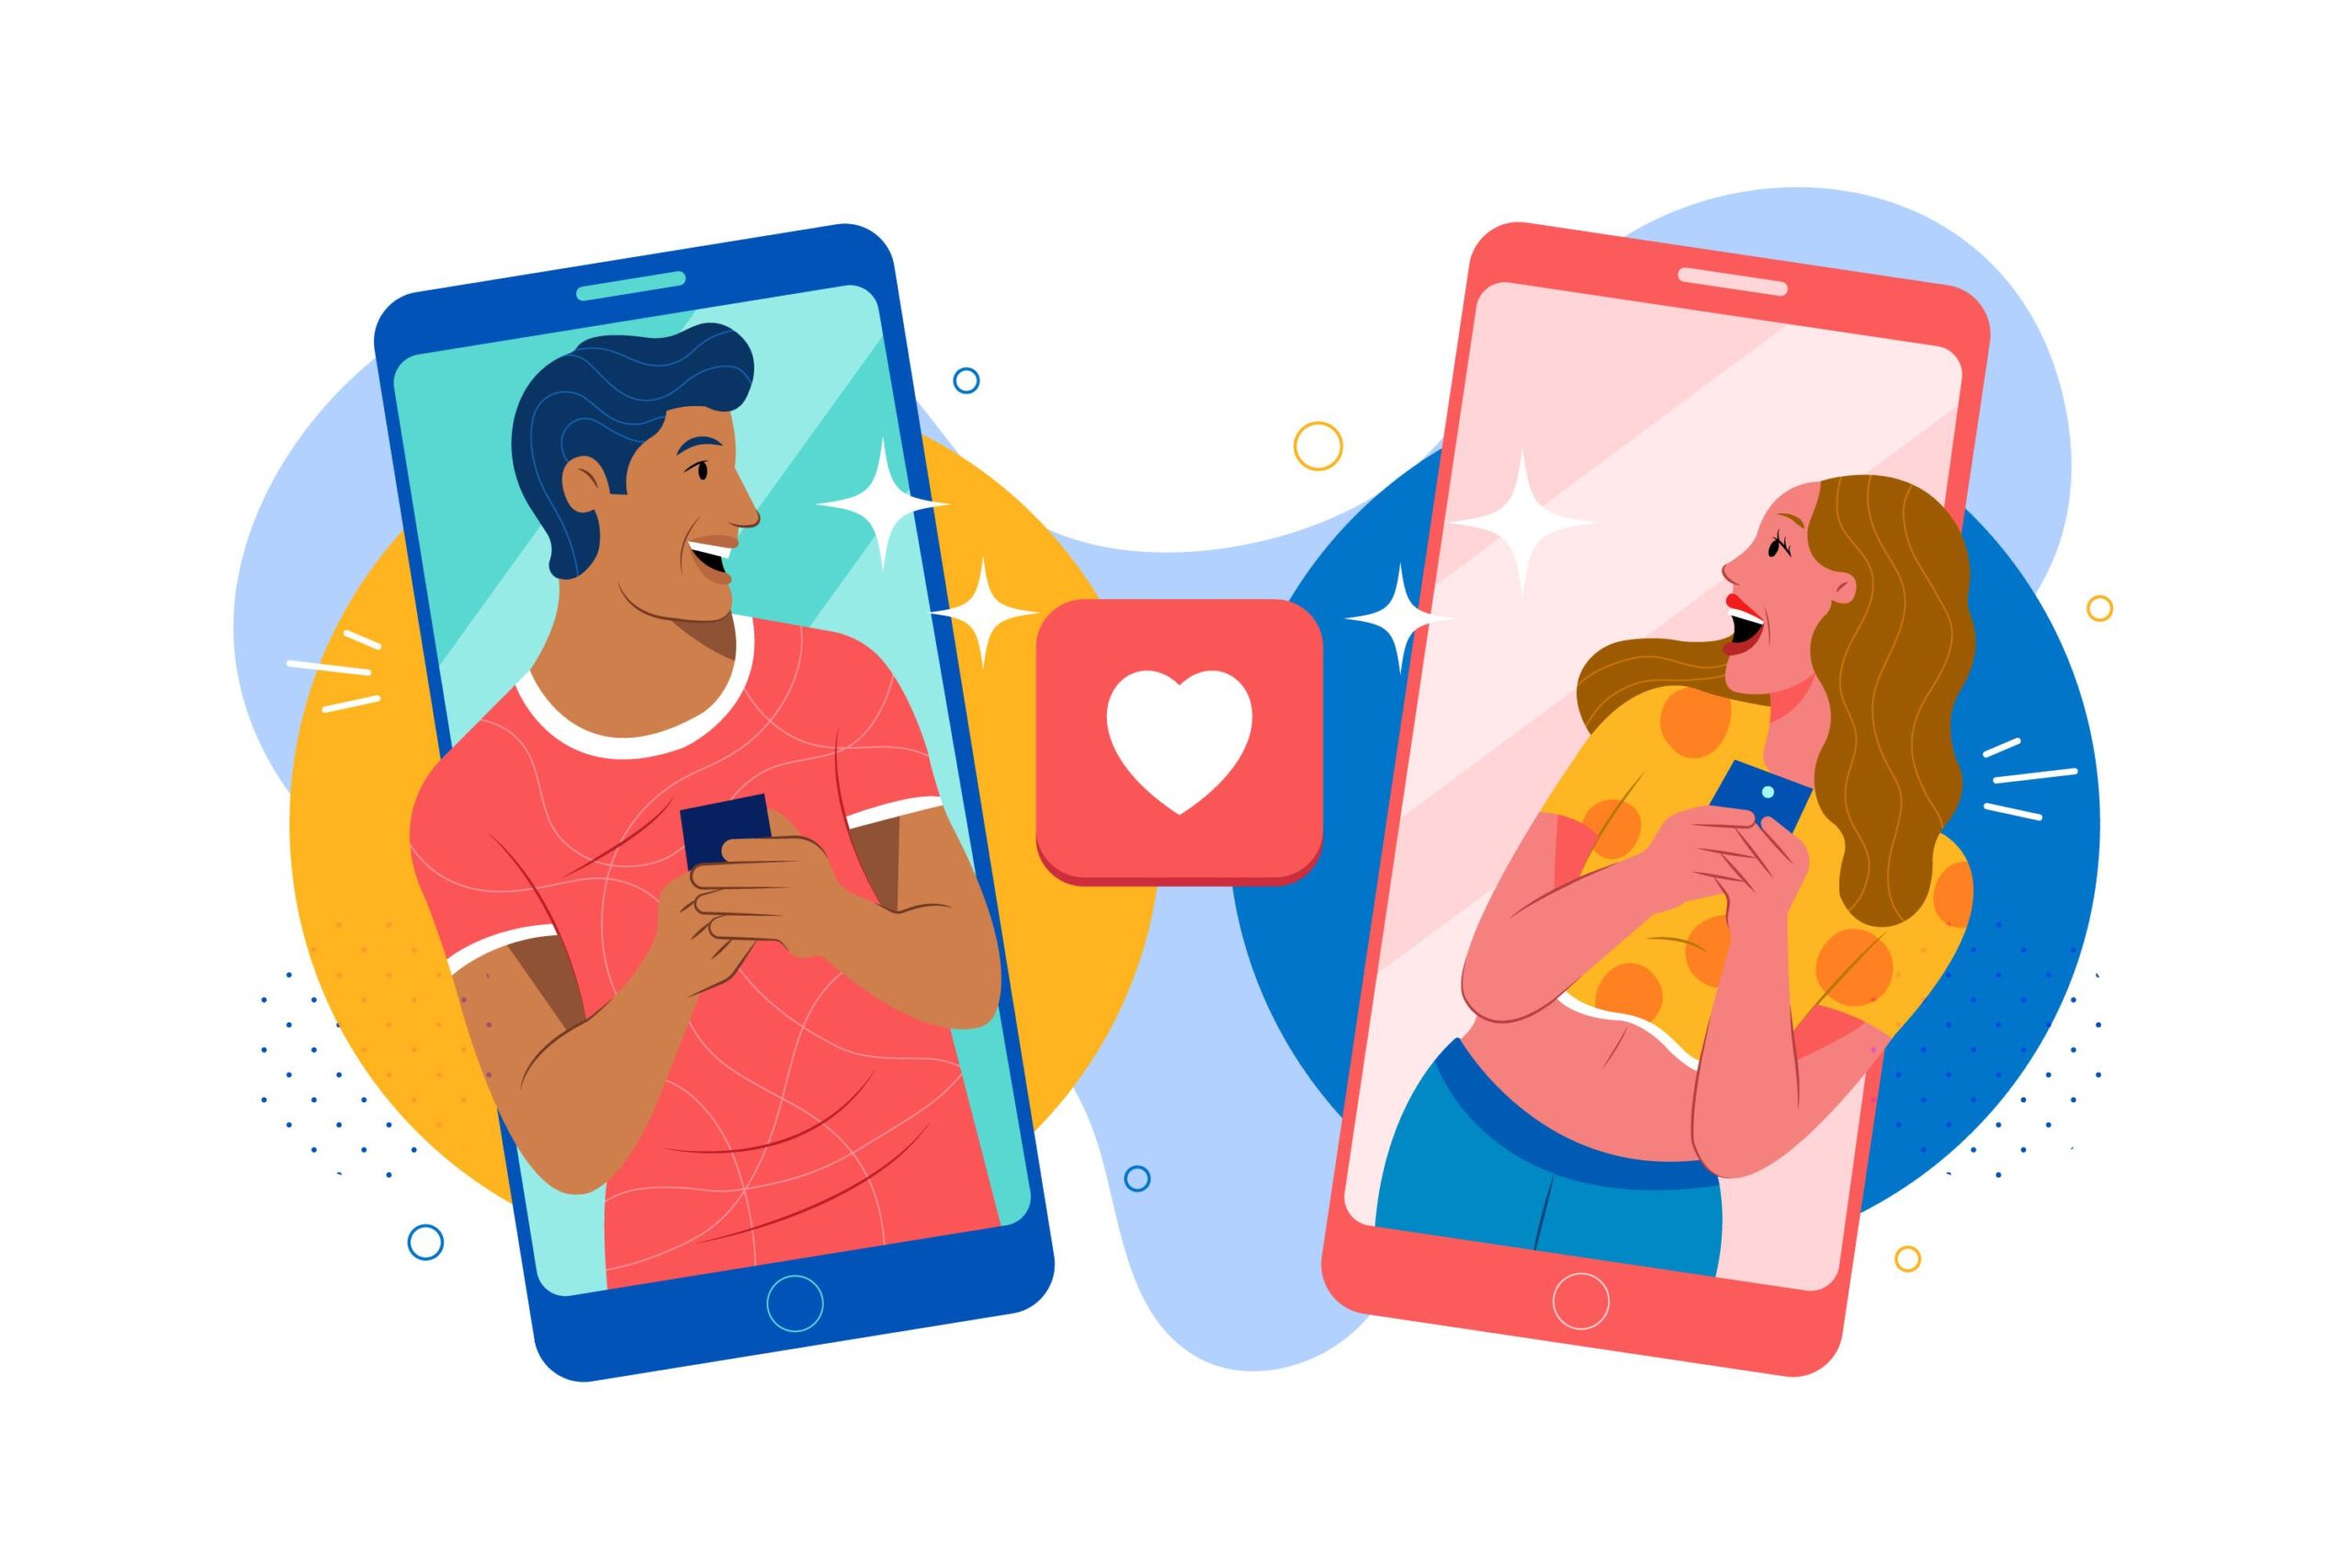 Data-Driven Design: The Influence of Developers on User Experience in Dating Apps